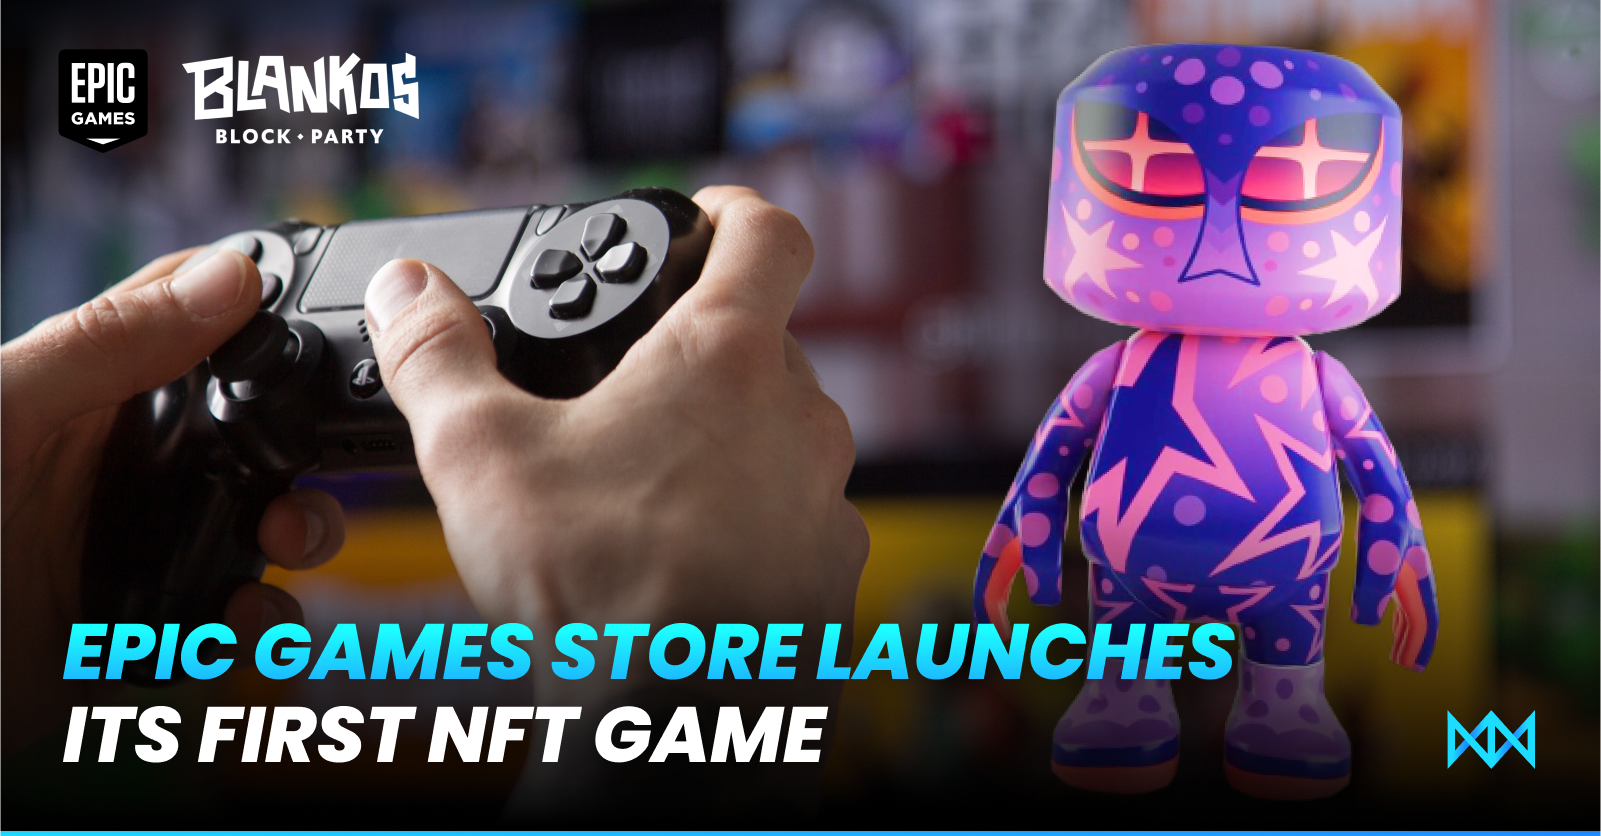 Epic Games Store has launched its first NFT game the Blankos Block Party